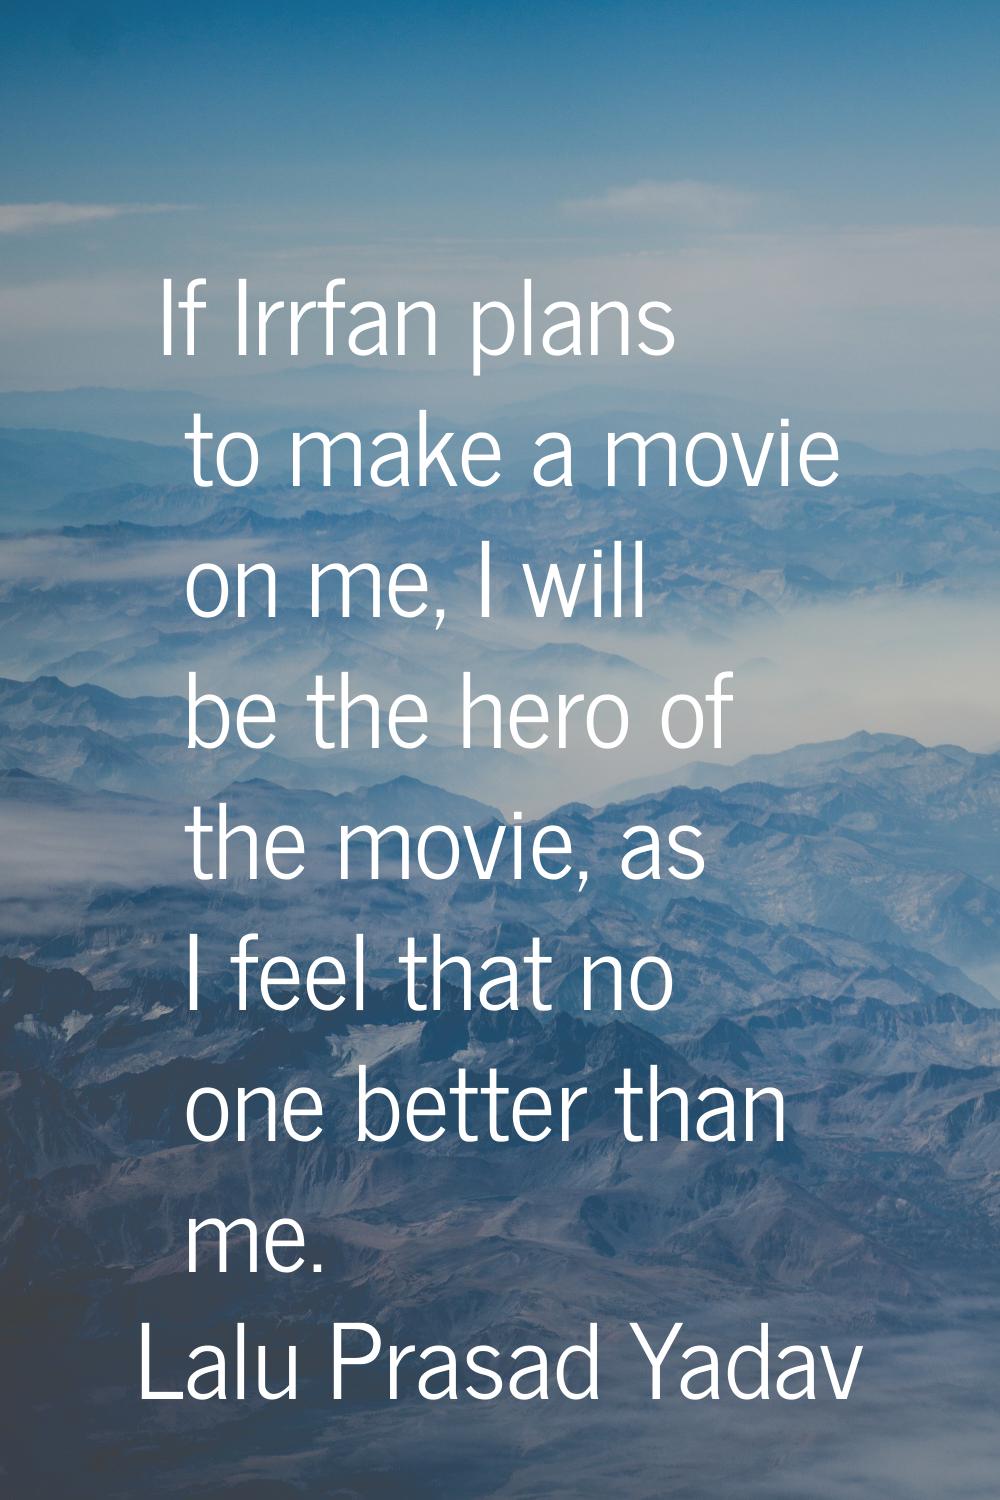 If Irrfan plans to make a movie on me, I will be the hero of the movie, as I feel that no one bette